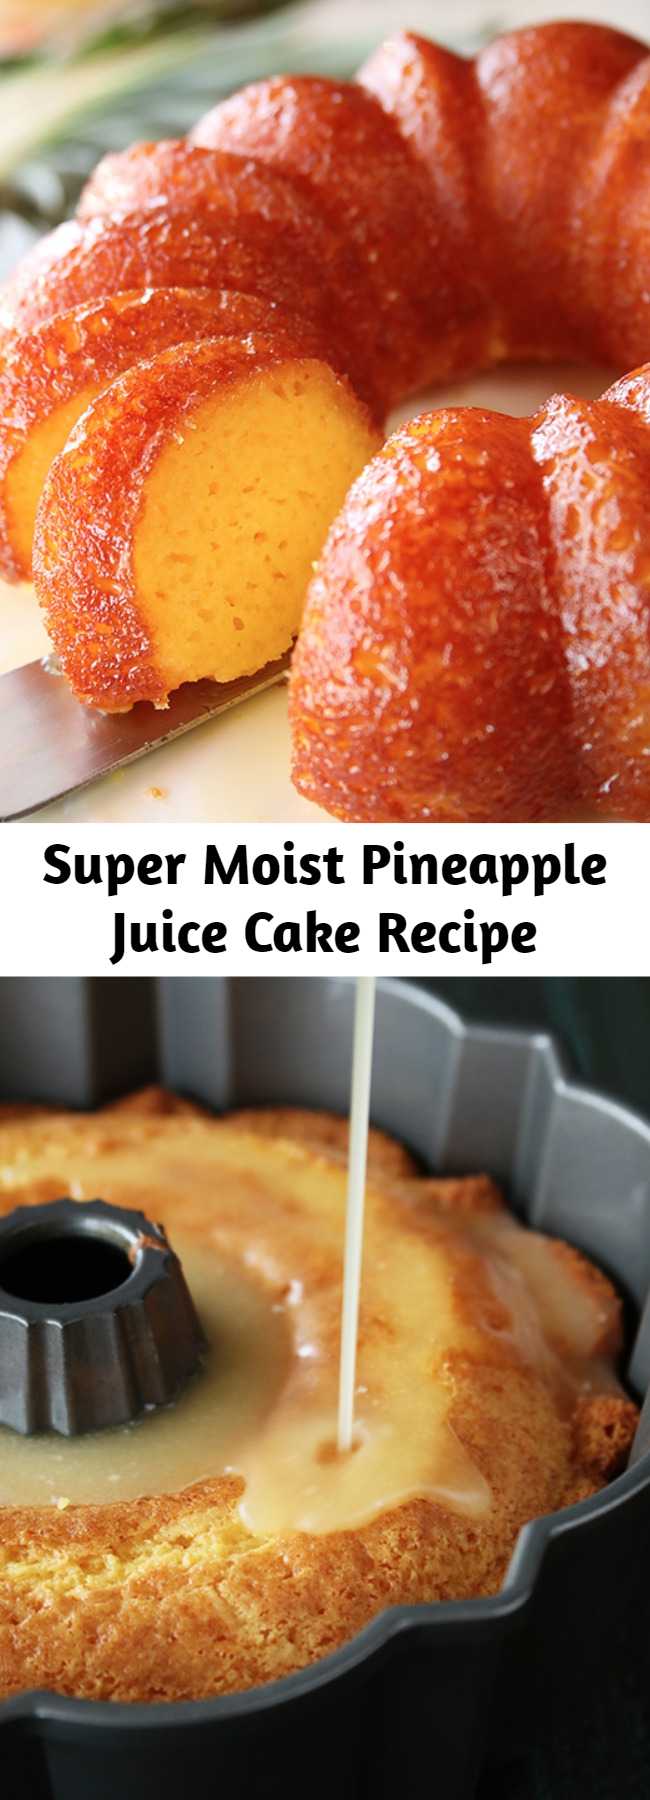 Super Moist Pineapple Juice Cake Recipe - The super moist cake is infused with pineapple flavor in the batter and the butter-pineapple glaze that it gets soaked in amps that pineapple flavor up even more!